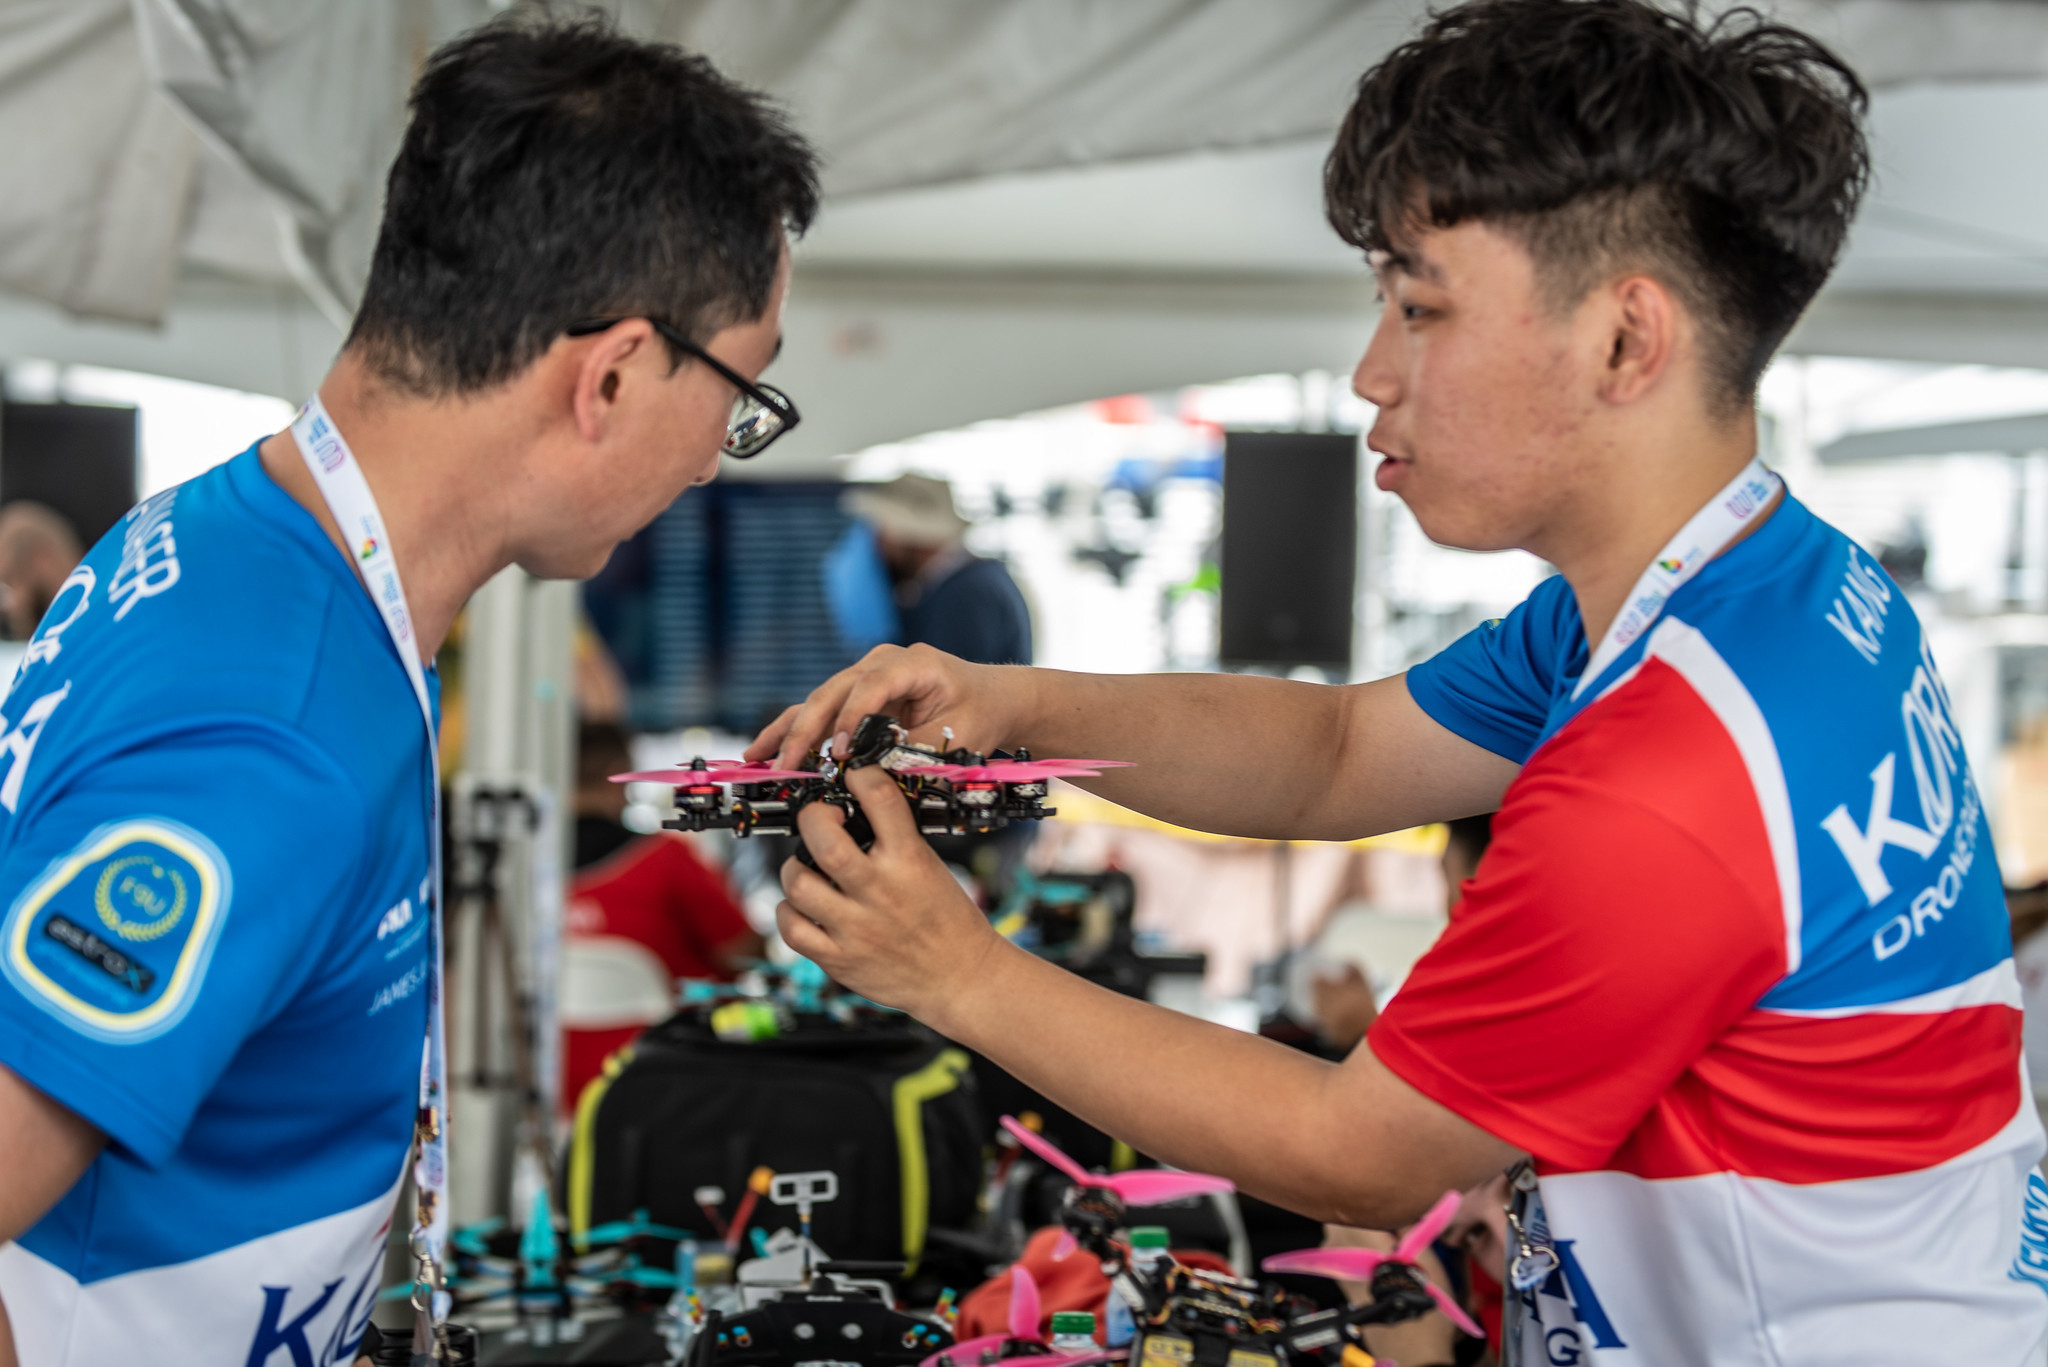 South Korea's team inspecting their drone ©World Games